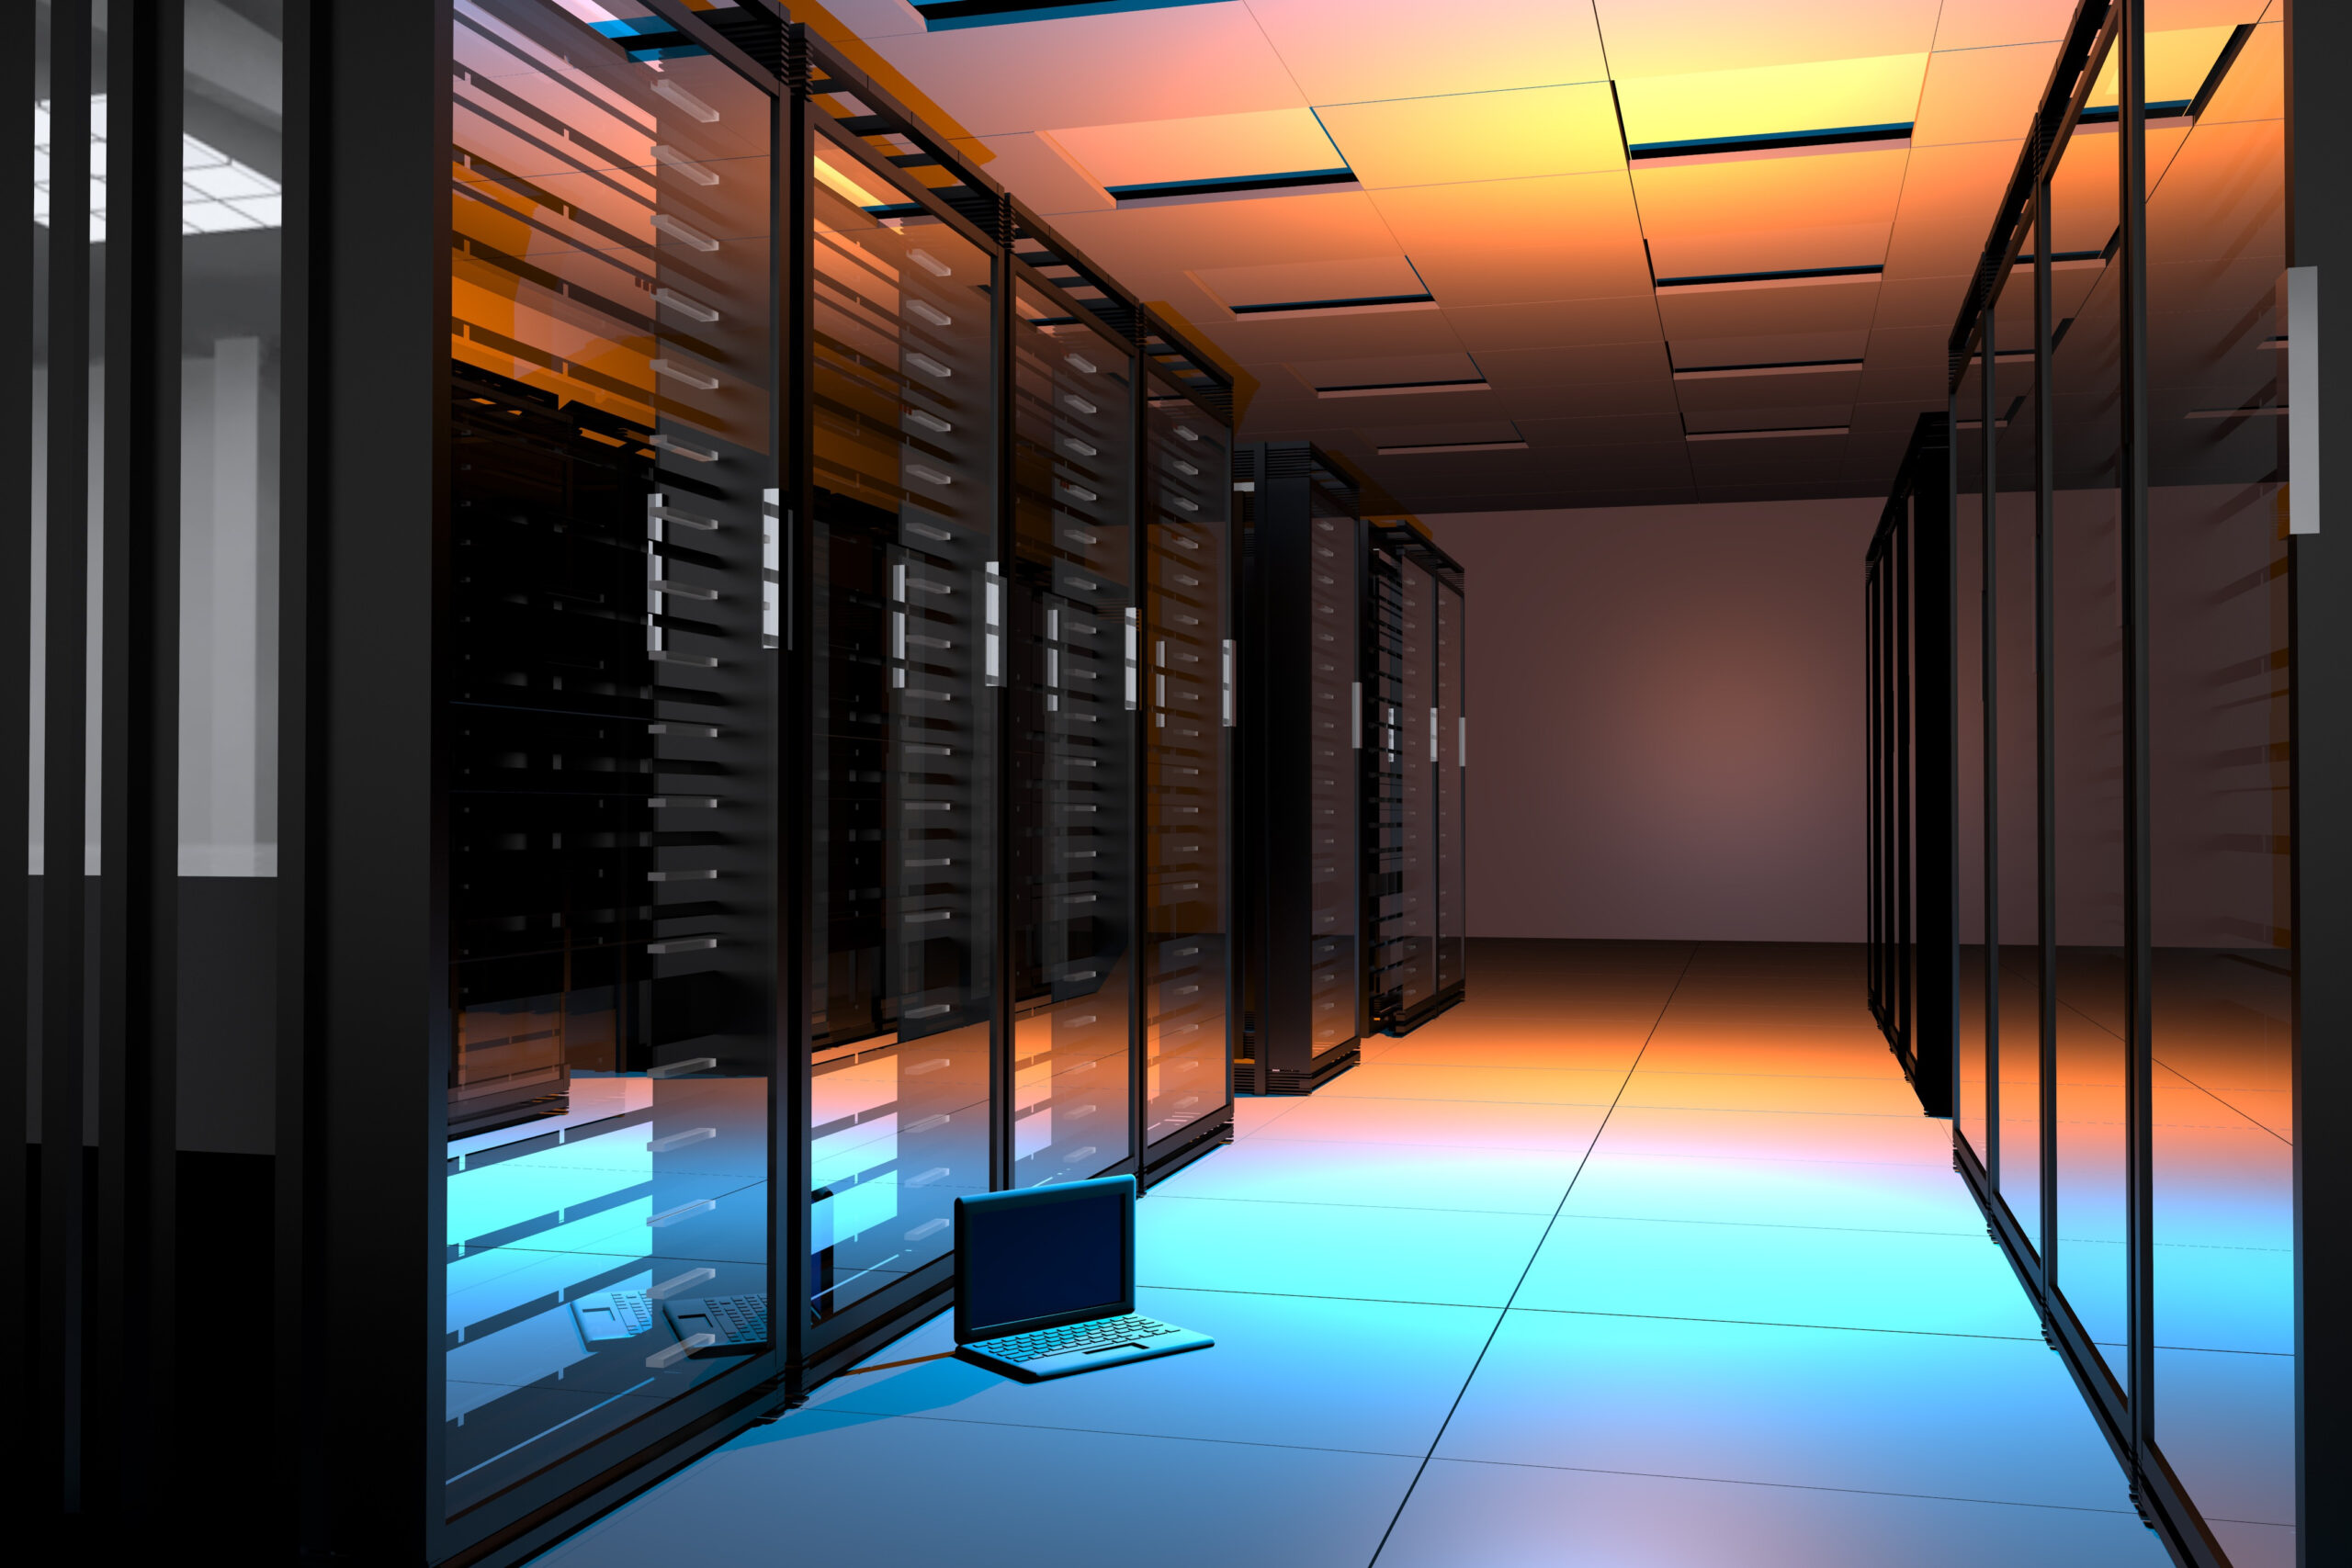 Image of web server data center being used by a web hosting provider.